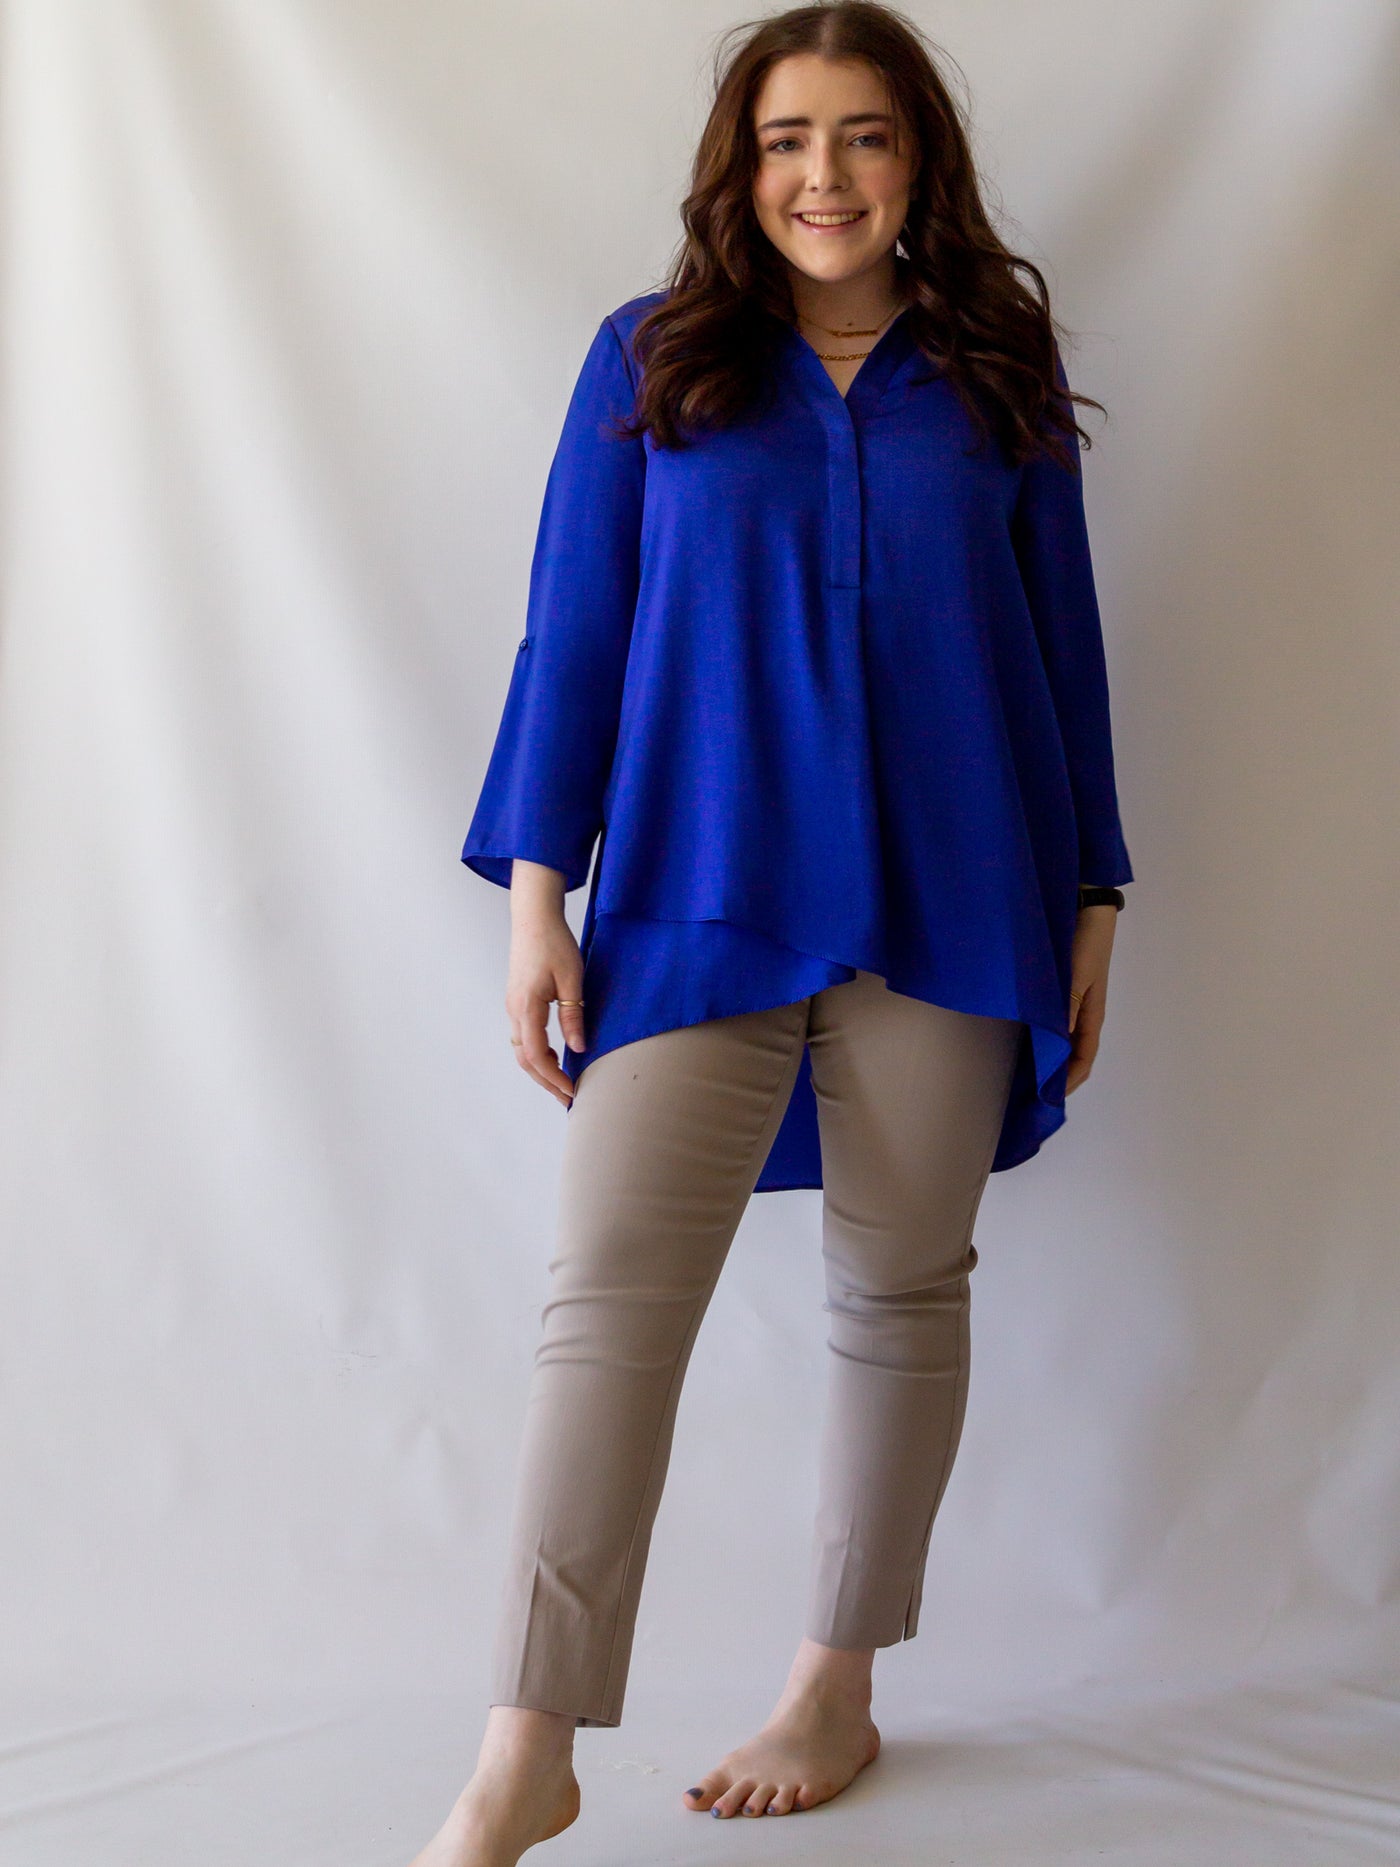 A model wearing a pair of sand colored cigarette pants and a royal blue blouse.